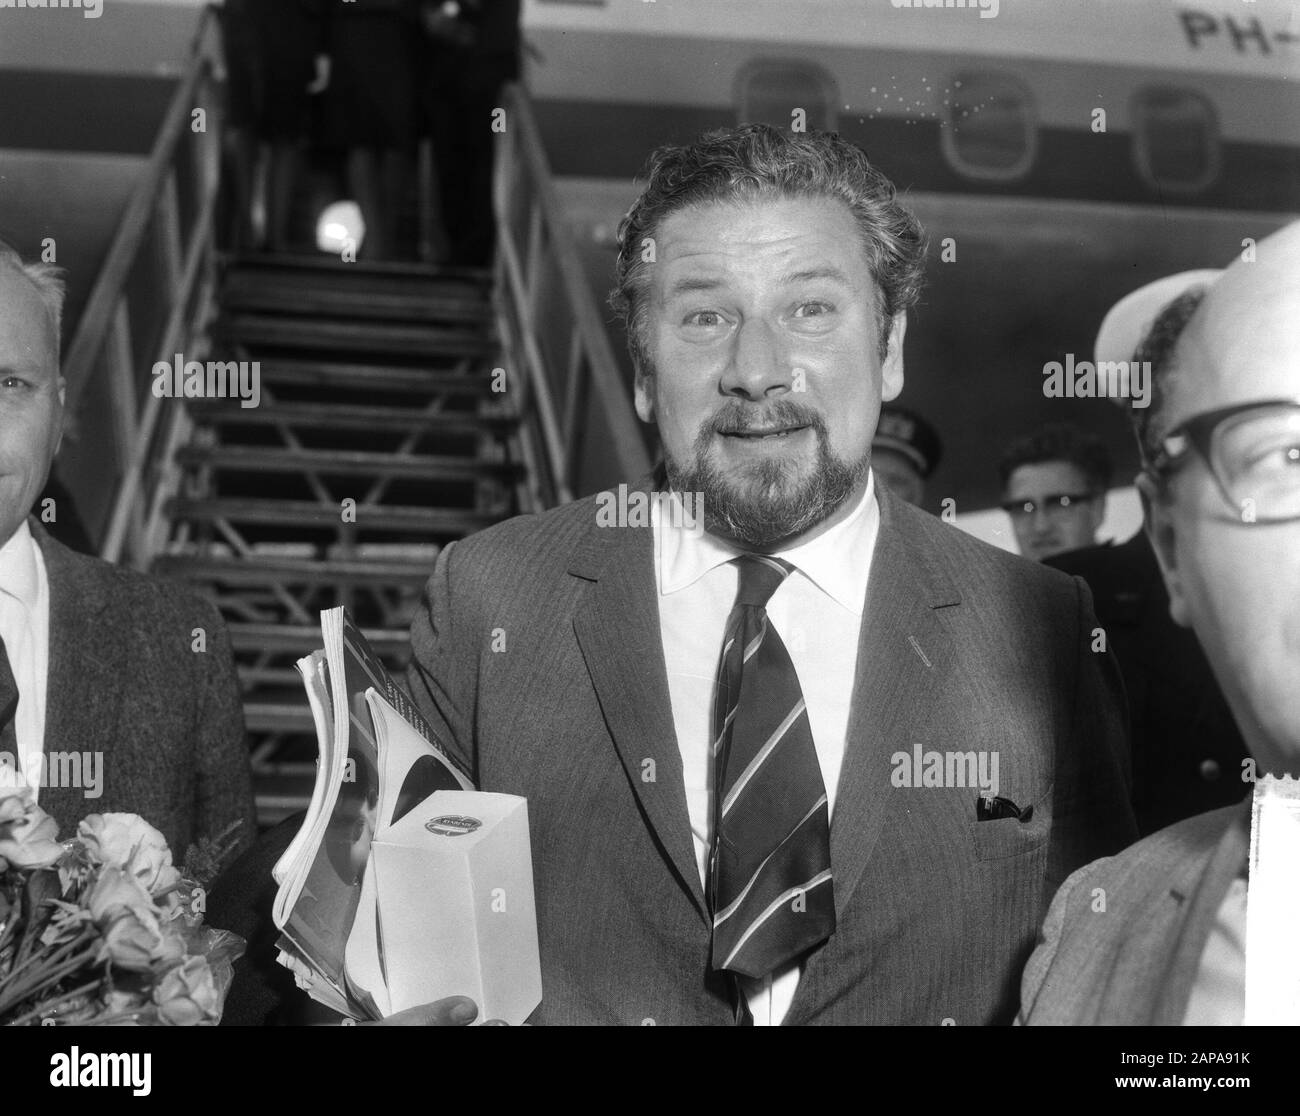 Arrival Charlie Chaplin and wife at Schiphol, Peter Ustinov (kop) Date: 23 June 1965 Location: Noord-Holland, Schiphol Keywords: arrivals, actors Personal name: Ustinov, Peter Stock Photo